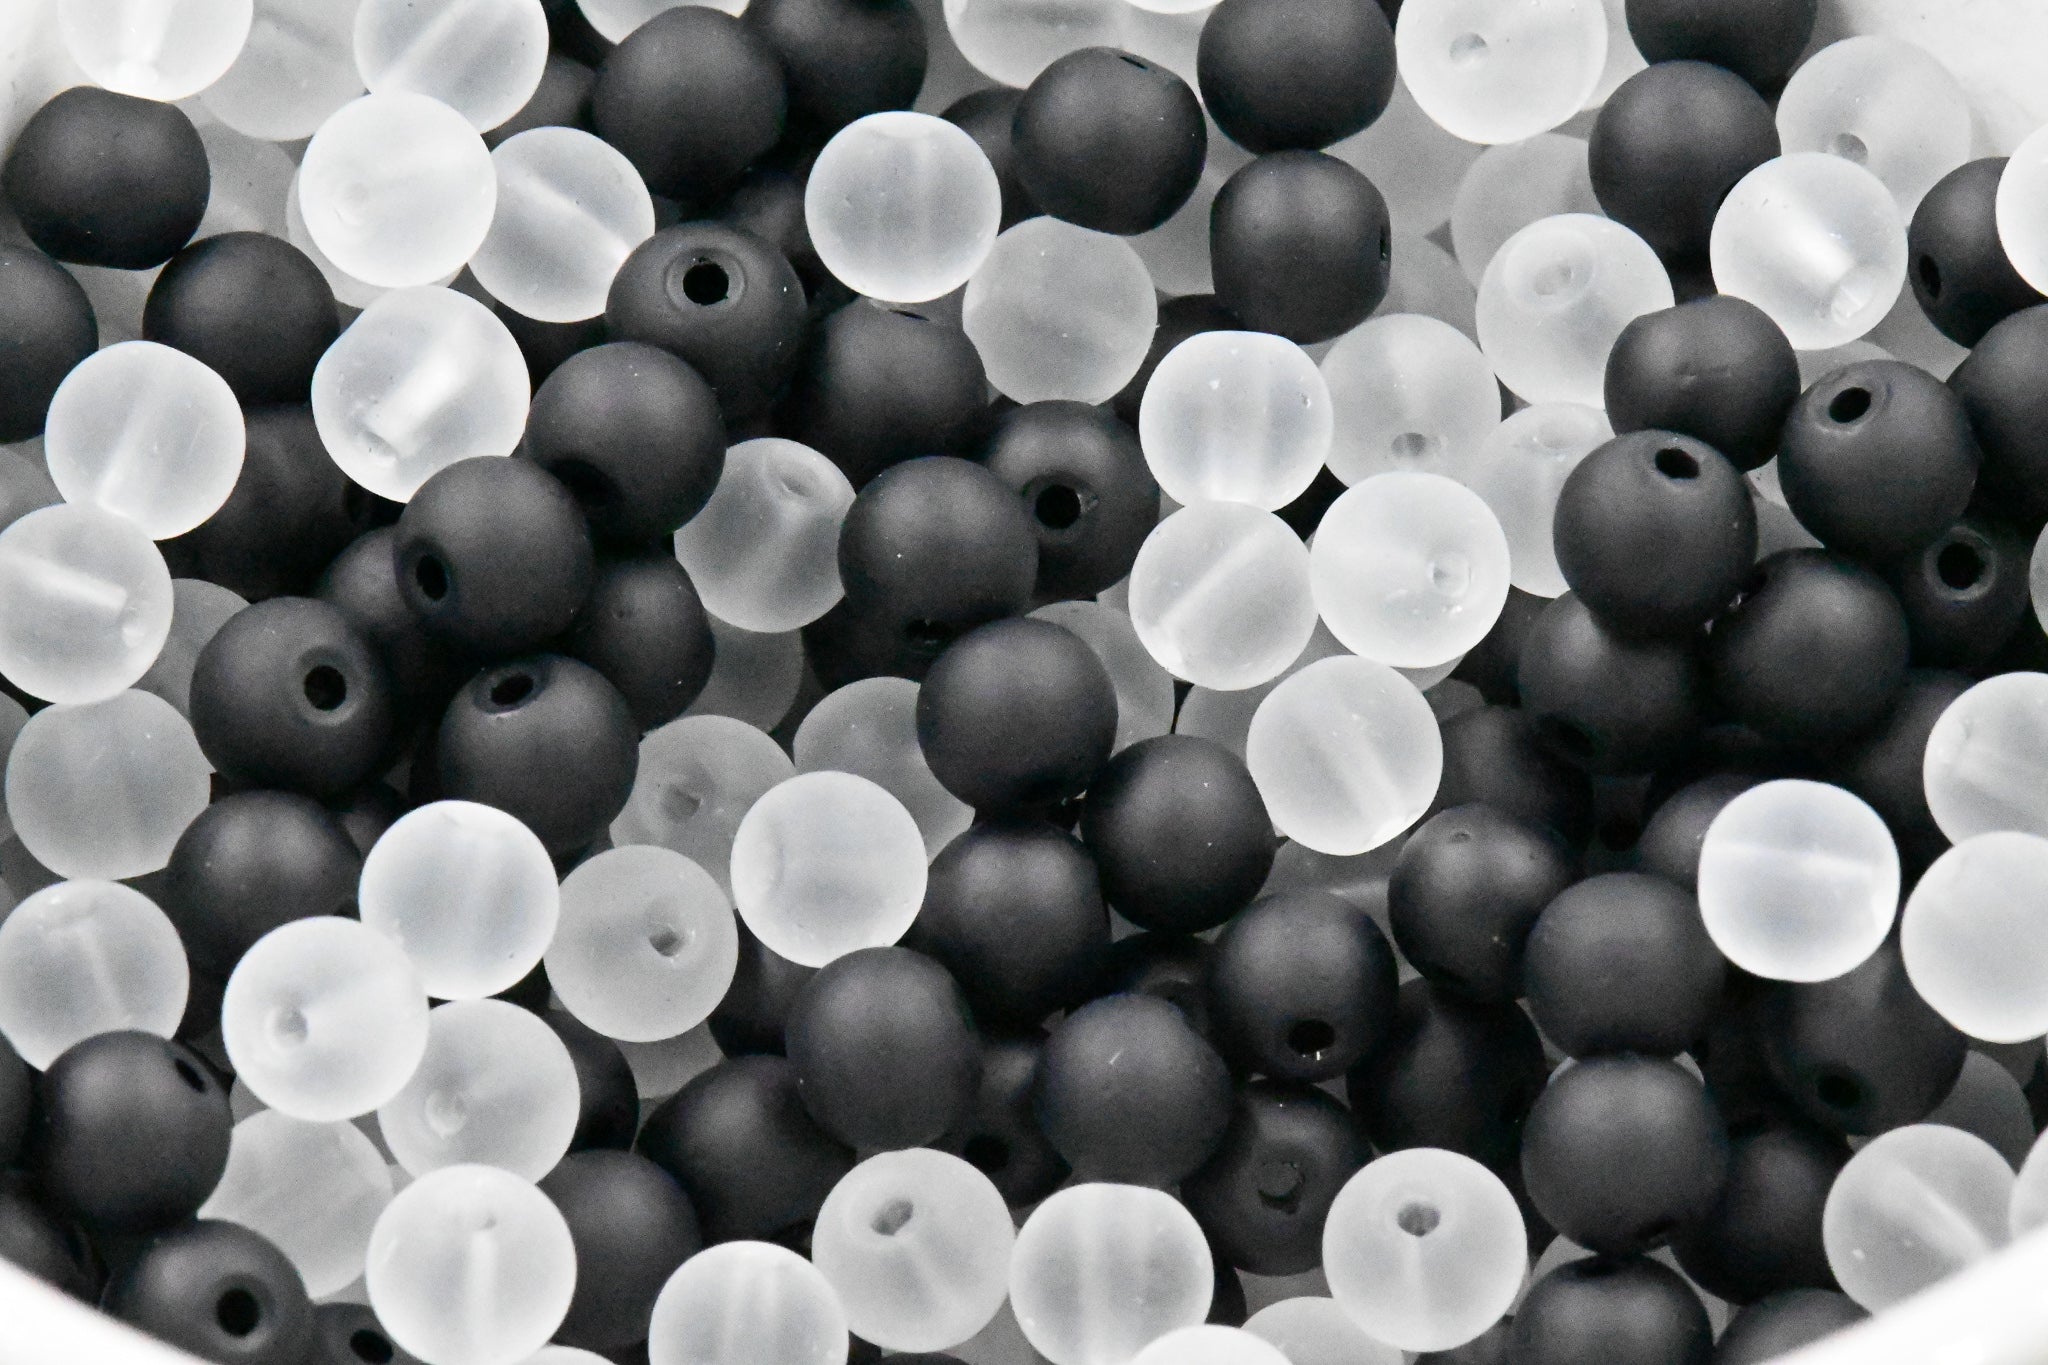 6mm 8mm Black and White Frosted Matte Glass Round Druk Cultured Sea Glass Beads - 100 beads